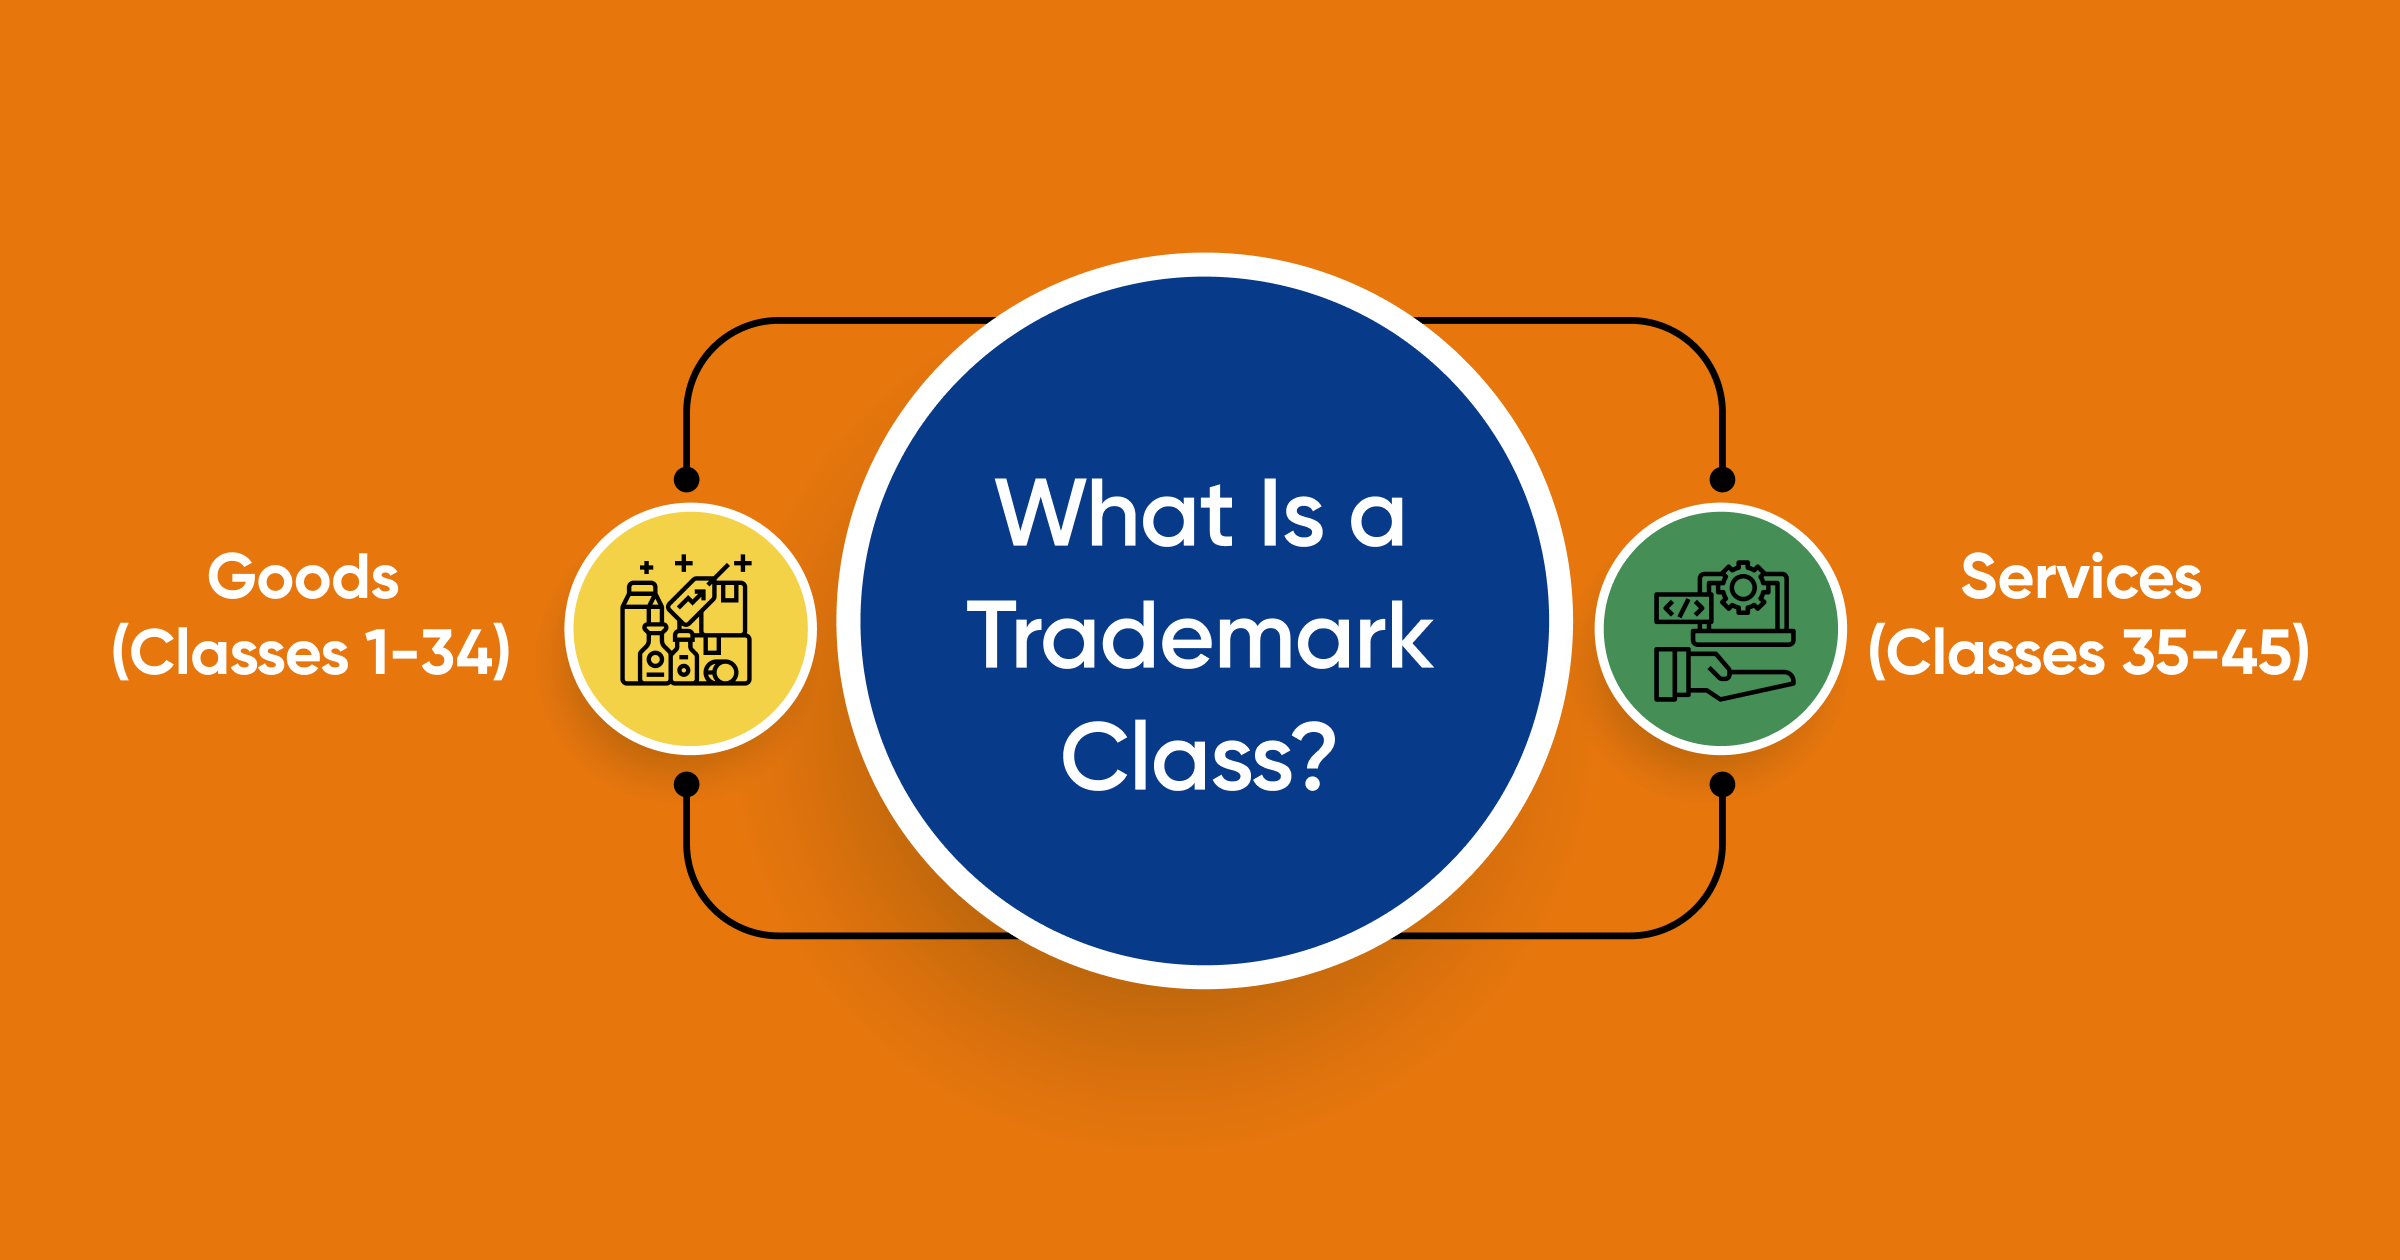 What Is a Trademark Class?